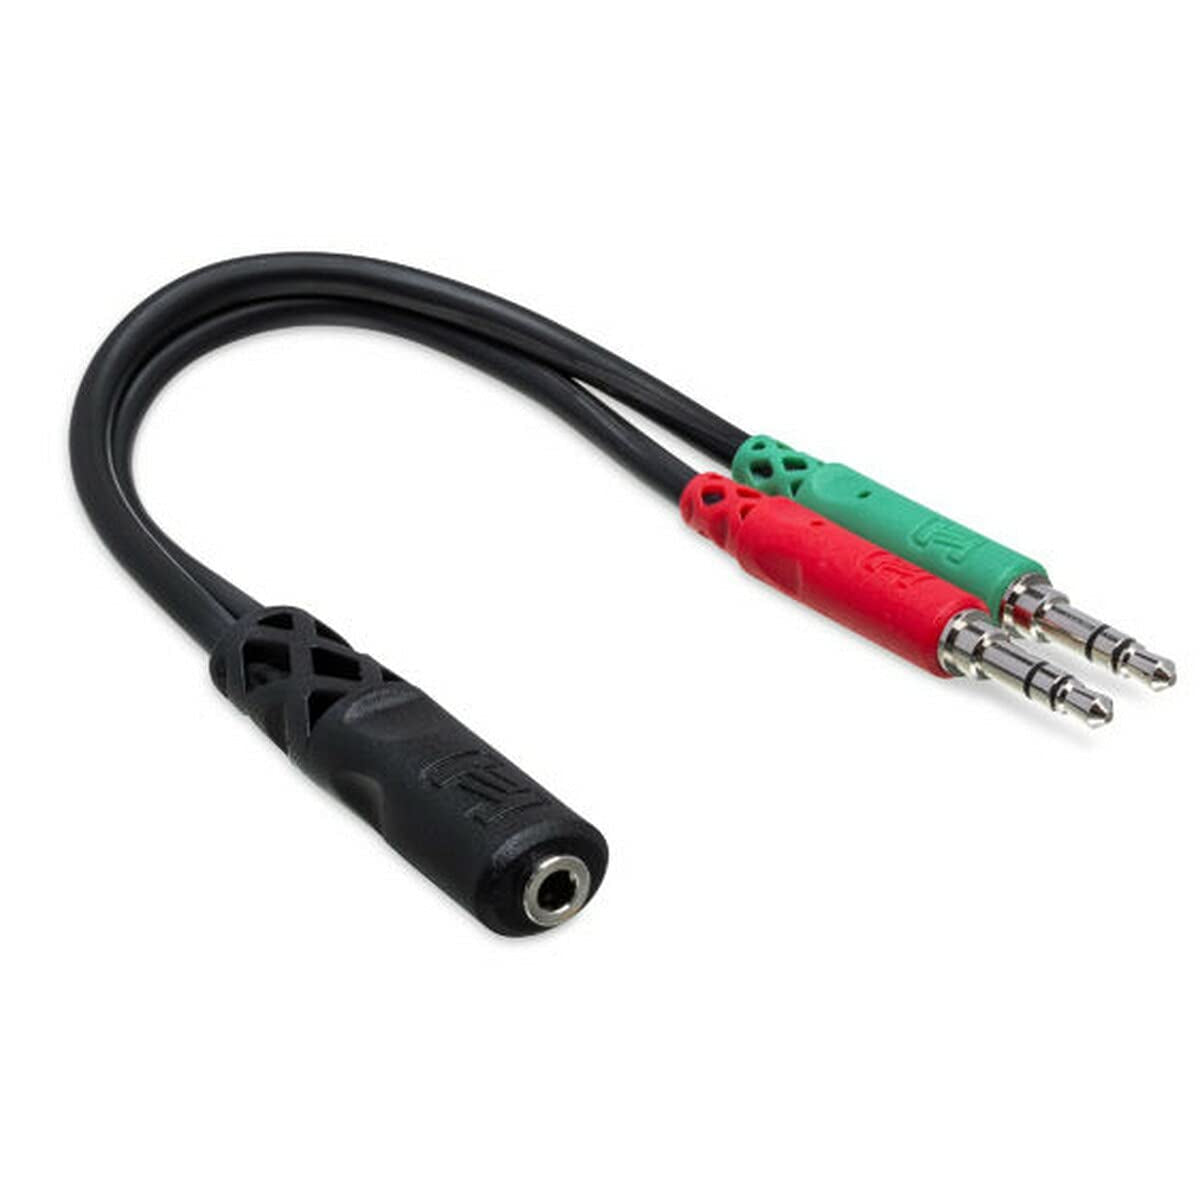 Hosa Headset/Mic Breakout Cable YMM-107 Side view